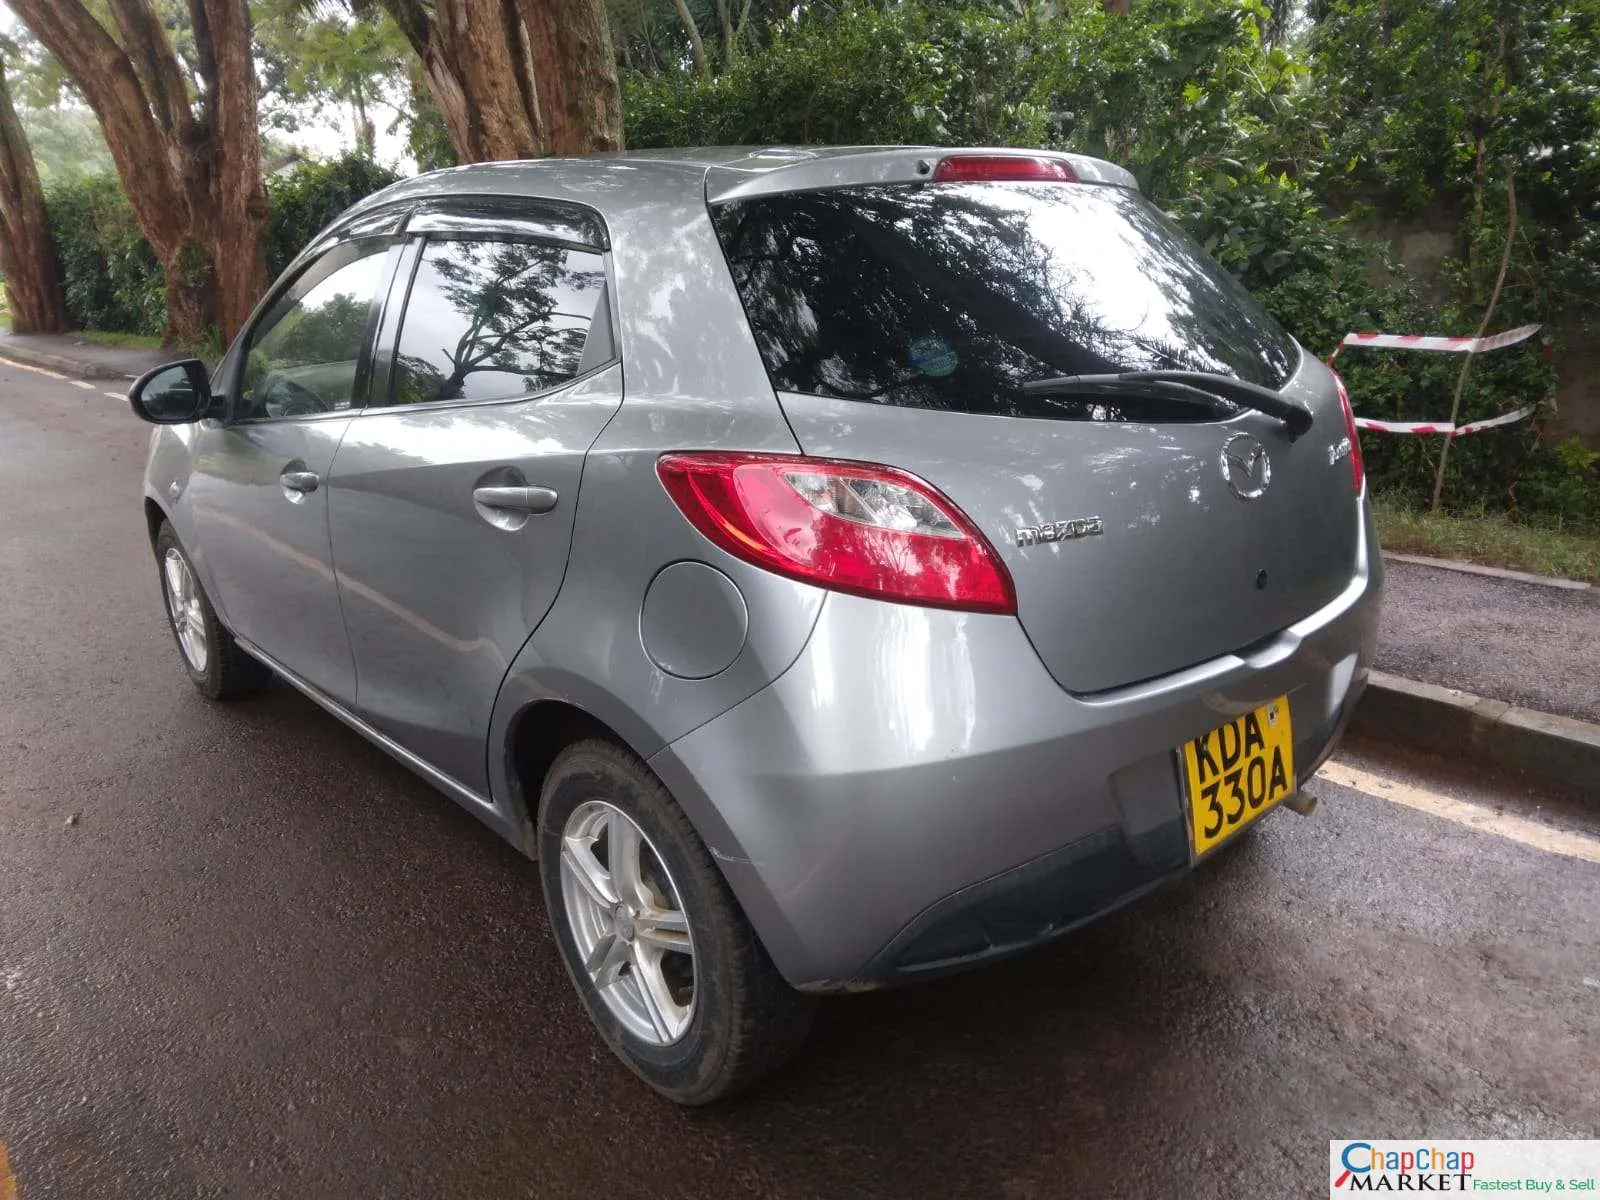 Cars Cars For Sale/Vehicles-Mazda Demio QUICK SALE You Pay 30% DEPOSIT TRADE IN OK EXCLUSIVE 5